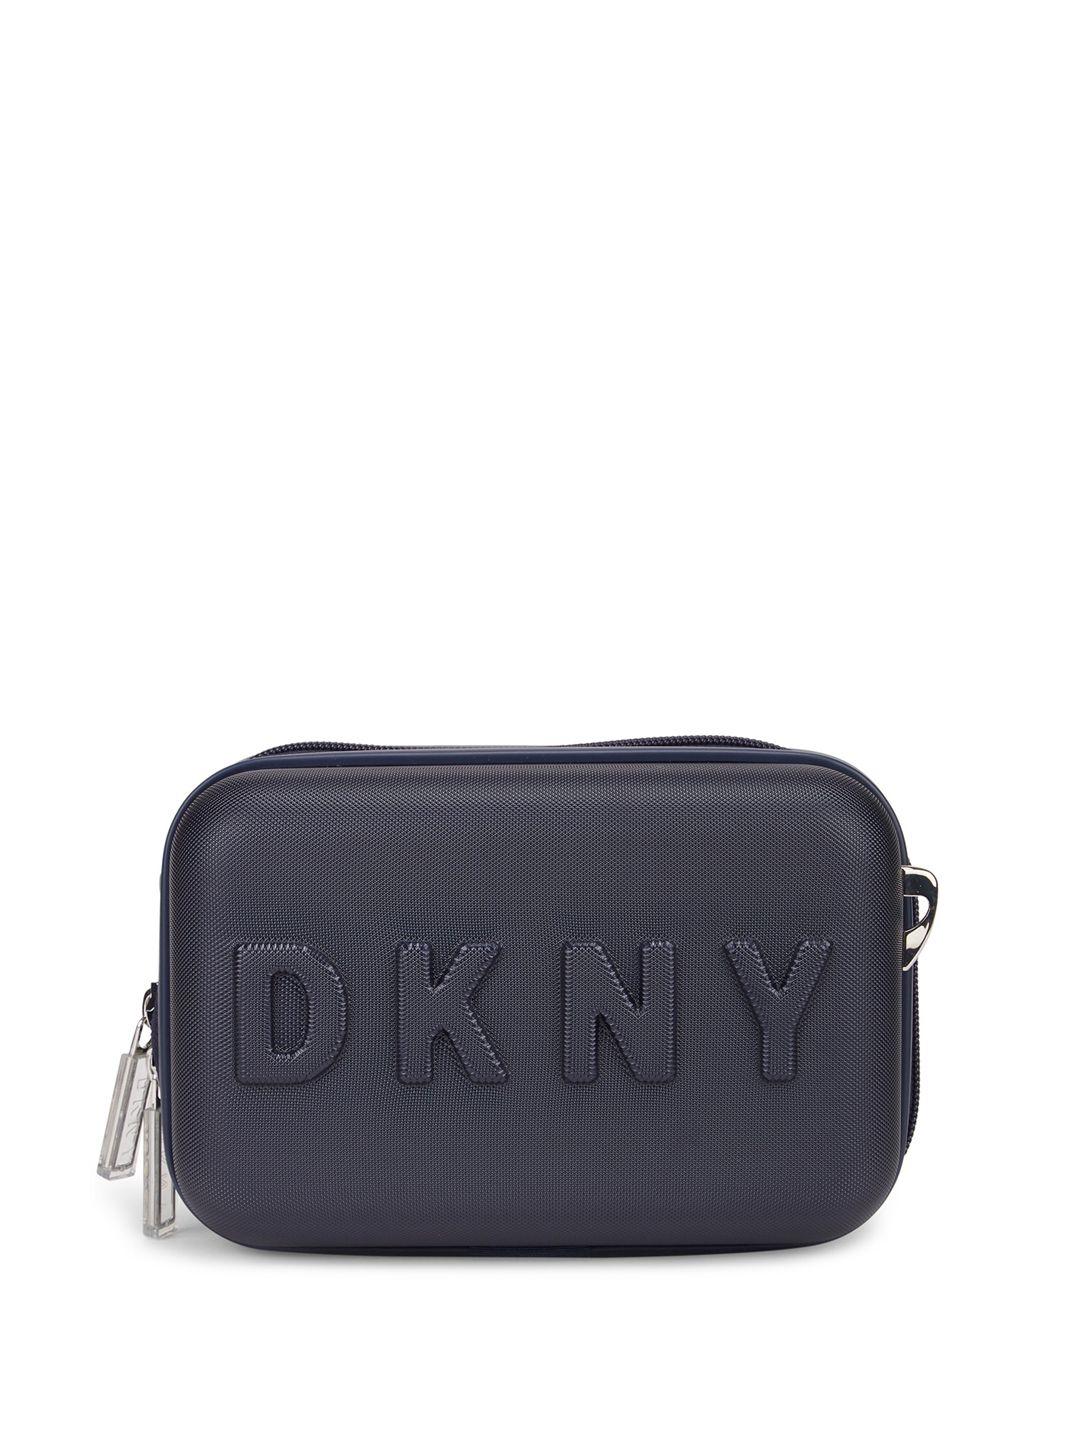 dkny abs hard beauty makeup pouch